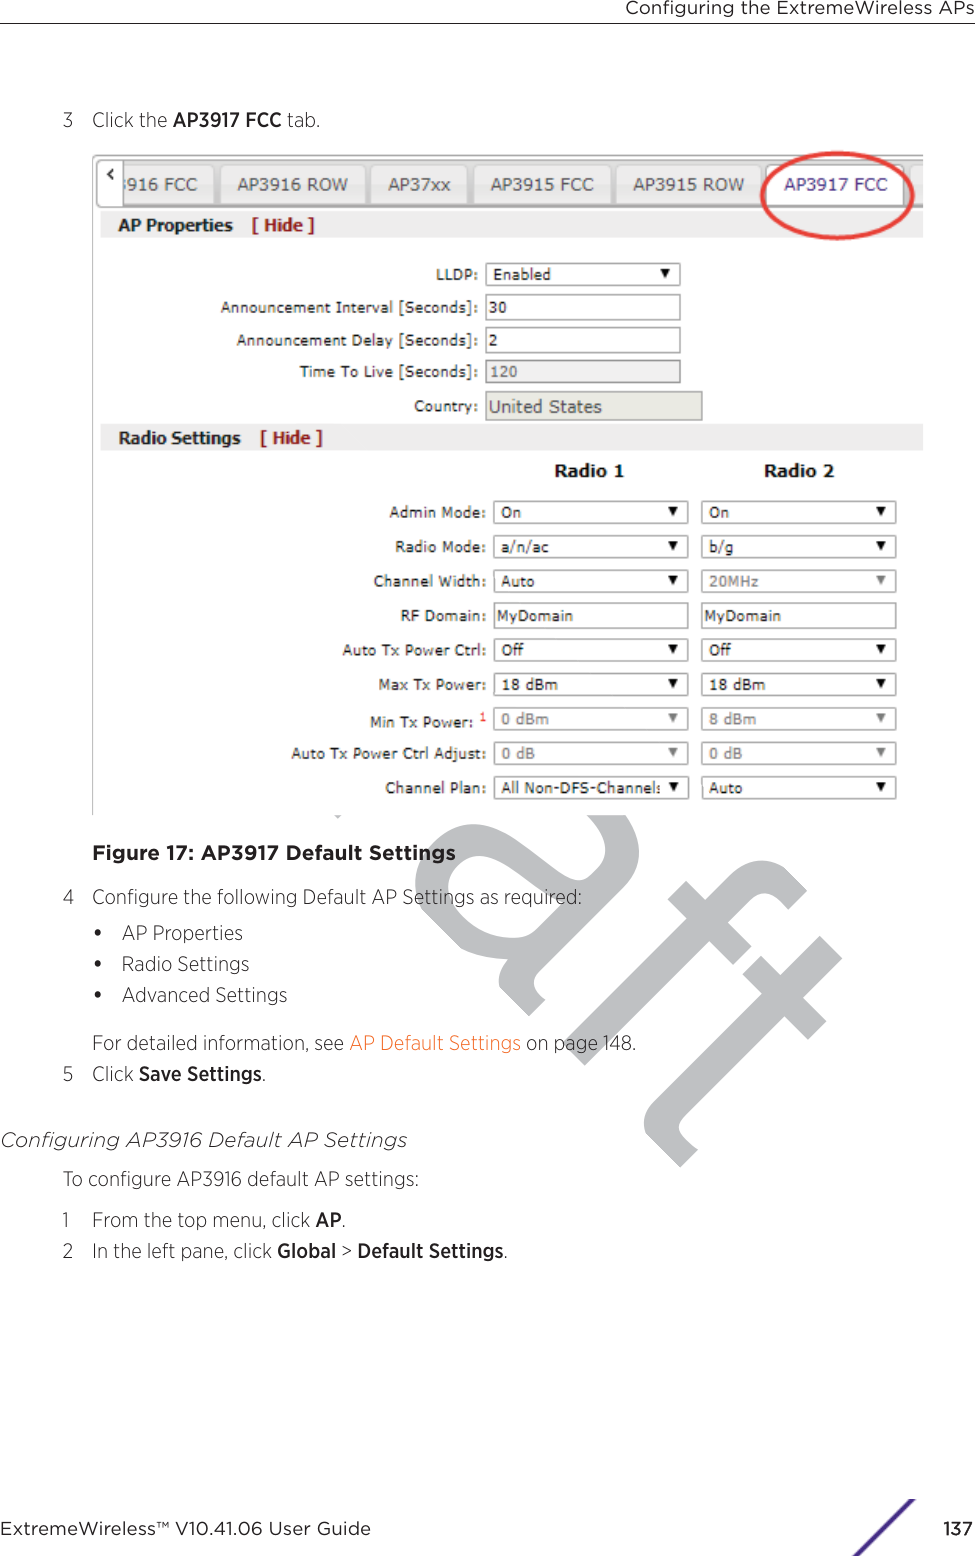 raft3 Click the AP3917 FCC tab.Figure 17: AP3917 Default Settings4 Conﬁgure the following Default AP Settings as required:•AP Properties•Radio Settings•Advanced SettingsFor detailed information, see AP Default Settings on page 148.5 Click Save Settings.Conﬁguring AP3916 Default AP SettingsTo conﬁgure AP3916 default AP settings:1 From the top menu, click AP.2 In the left pane, click Global &gt; Default Settings.Conﬁguring the ExtremeWireless APsExtremeWireless™ V10.41.06 User Guide 1137